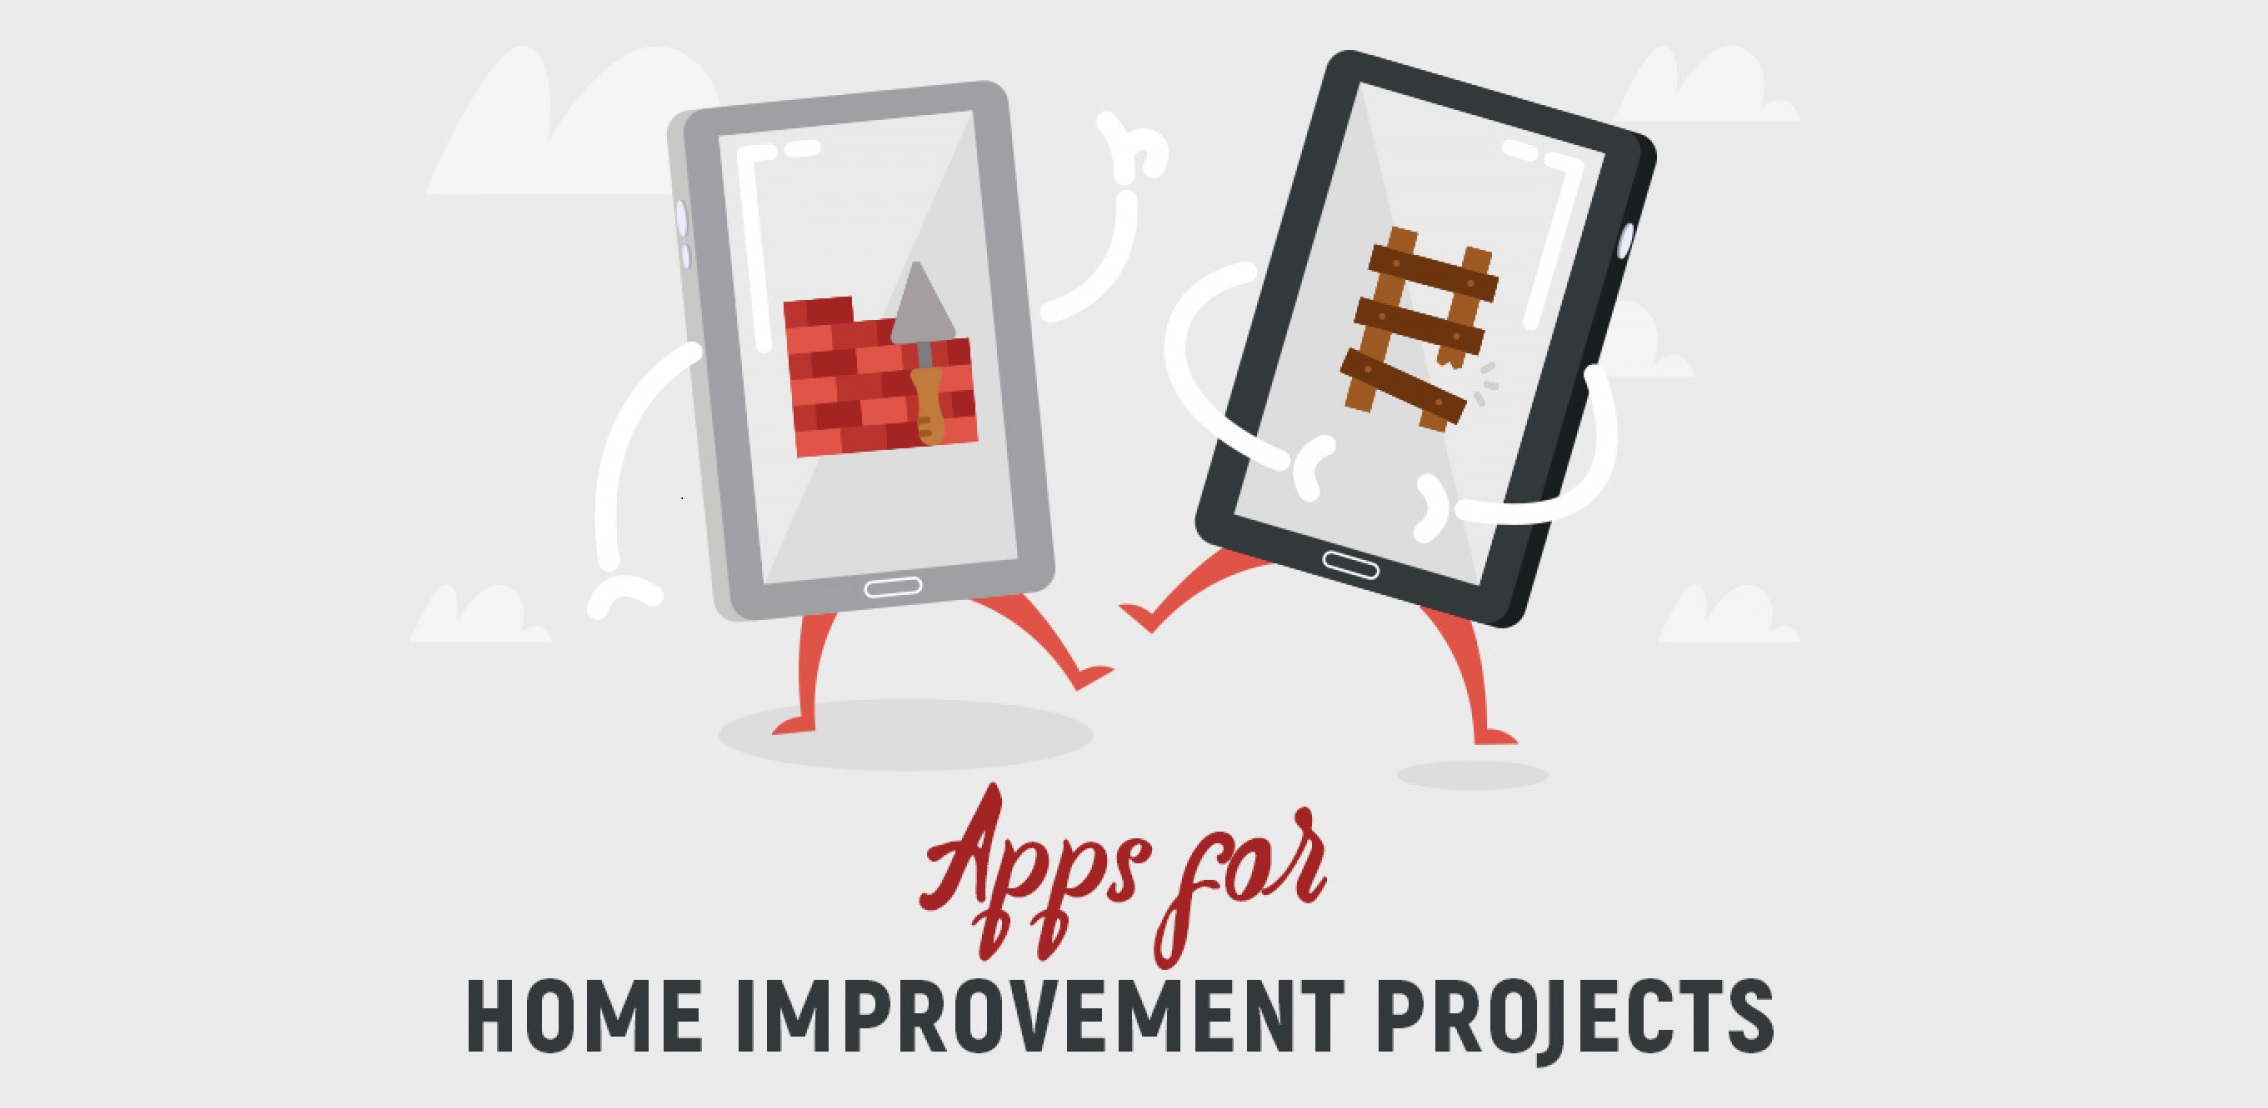 Our Favorite Apps For Home Improvement Projects